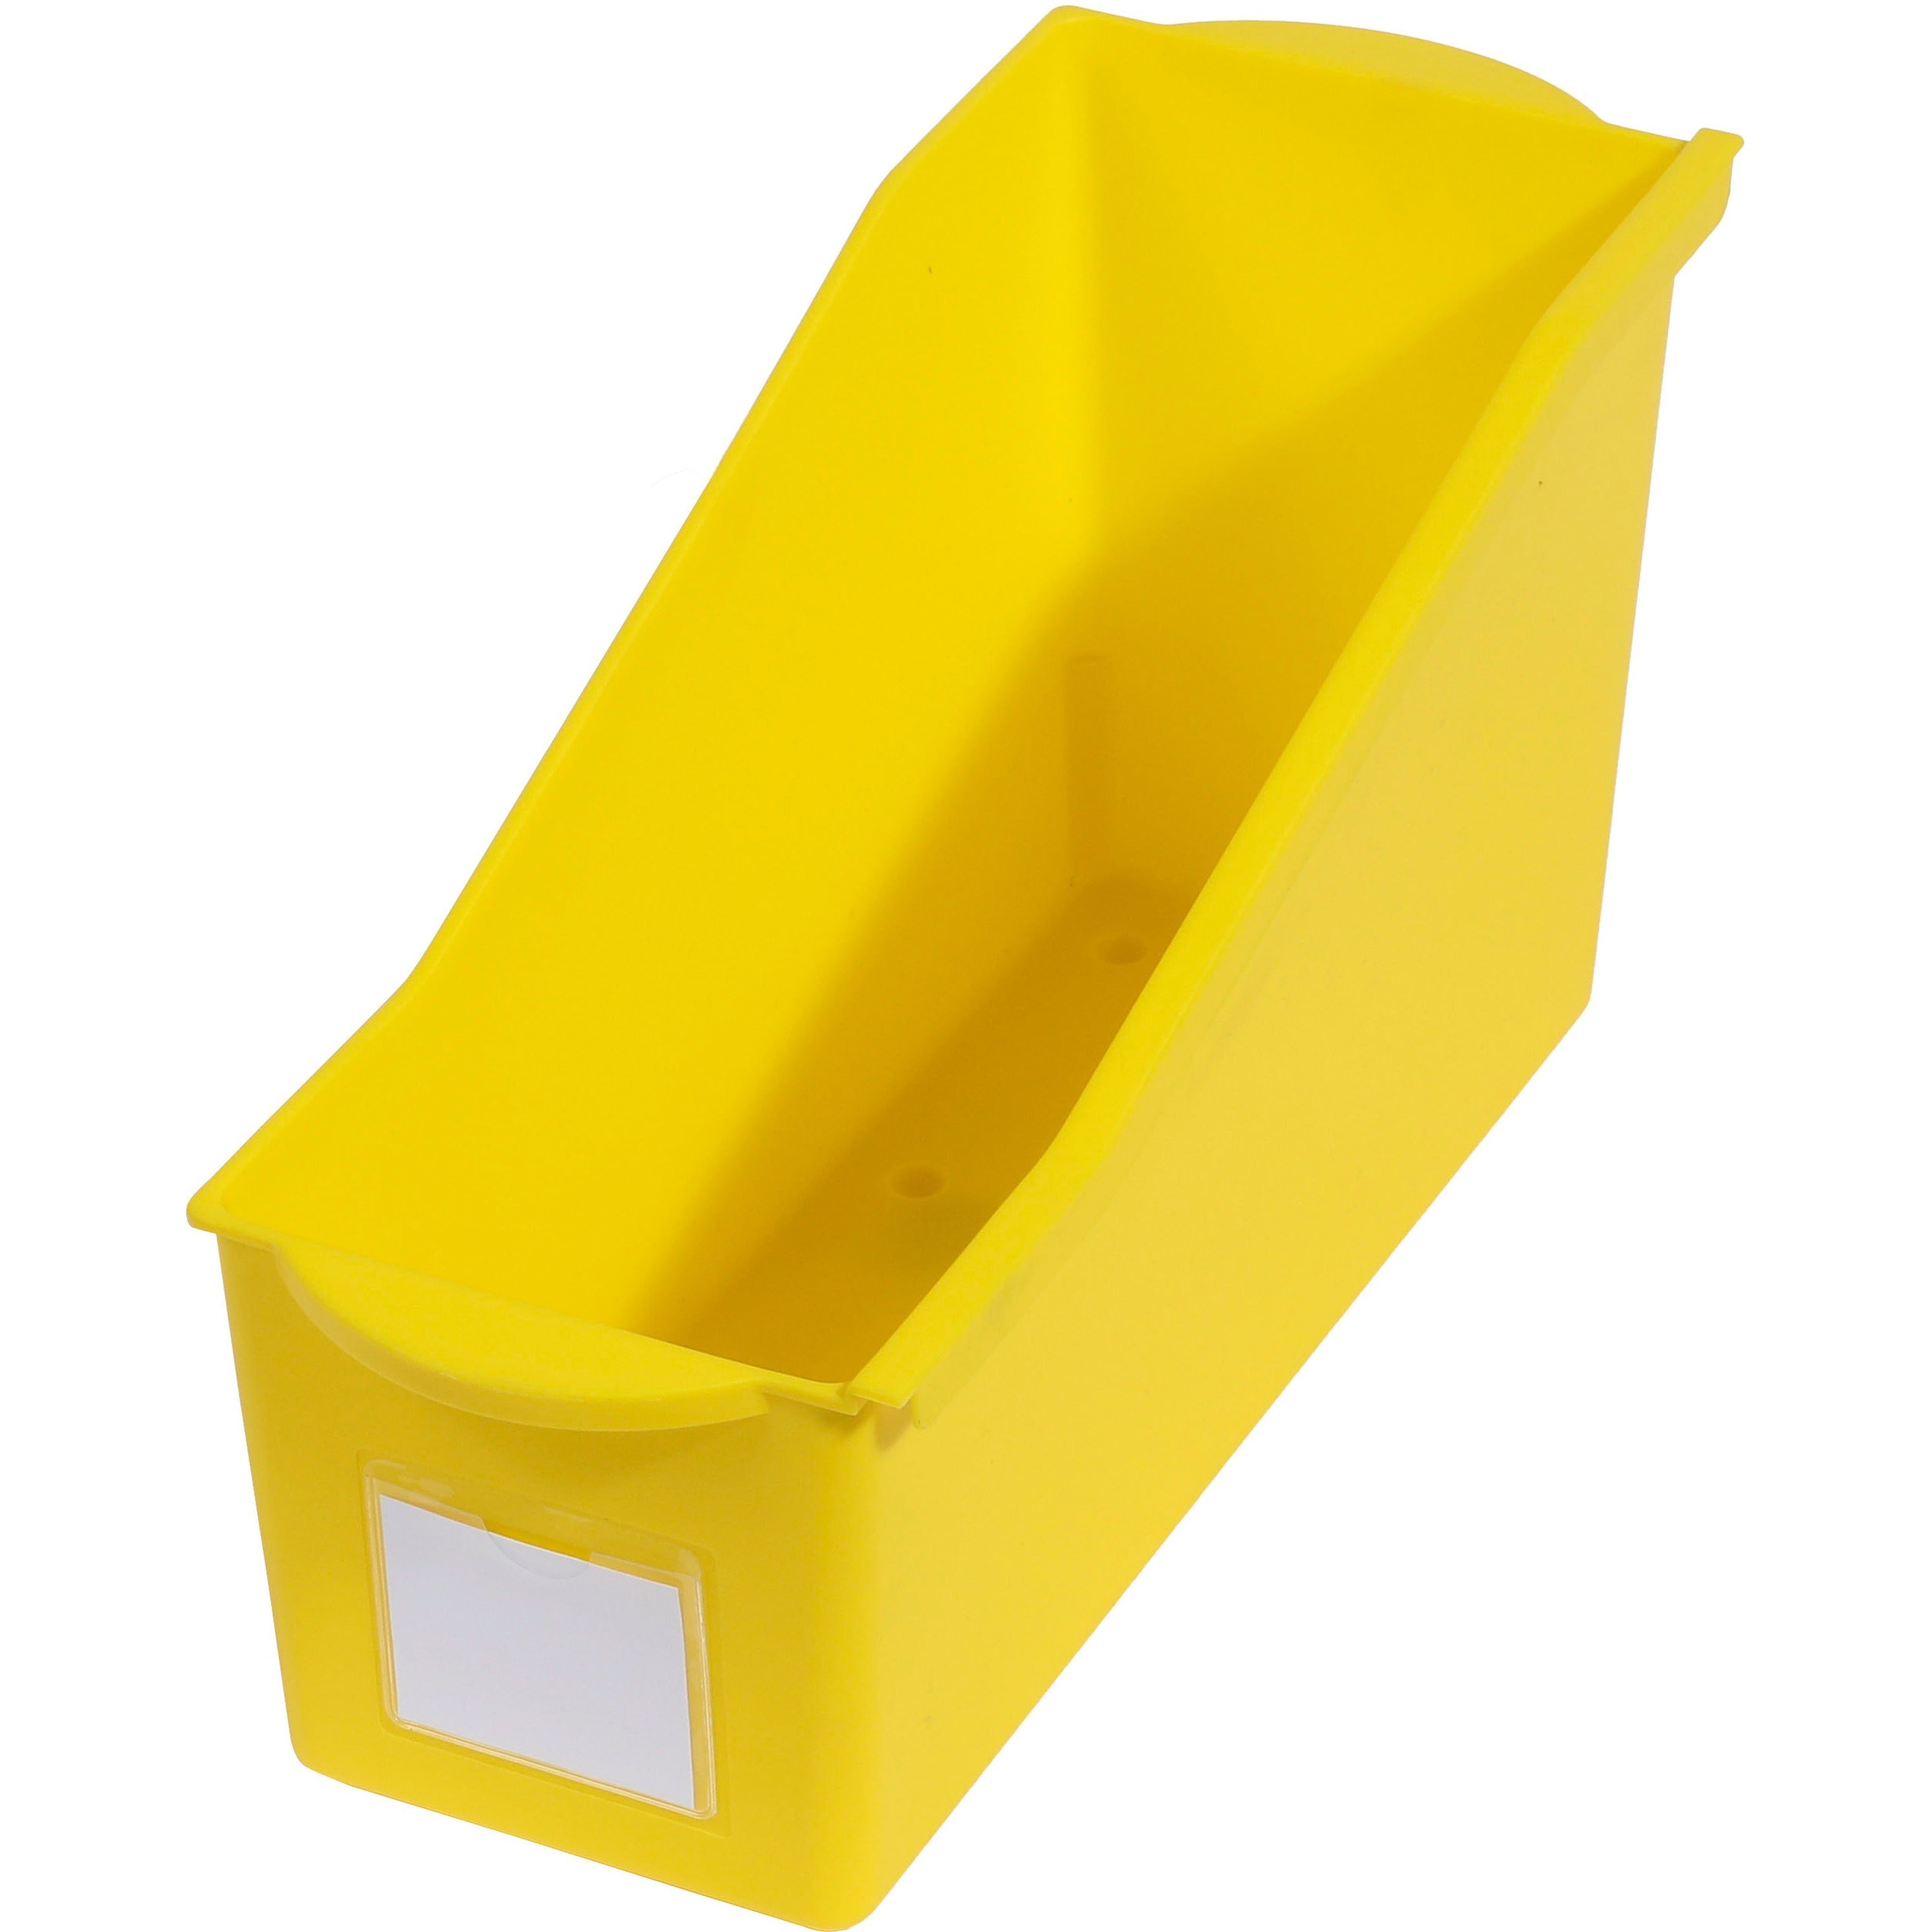 deflecto-antimicrobial-kids-book-bin-74-height-x-142-width-x-53-depth-antimicrobial-lightweight-portable-mold-resistant-mildew-resistant-stackable-handle-yellow-polypropylene-1-each_def39508yel - 3